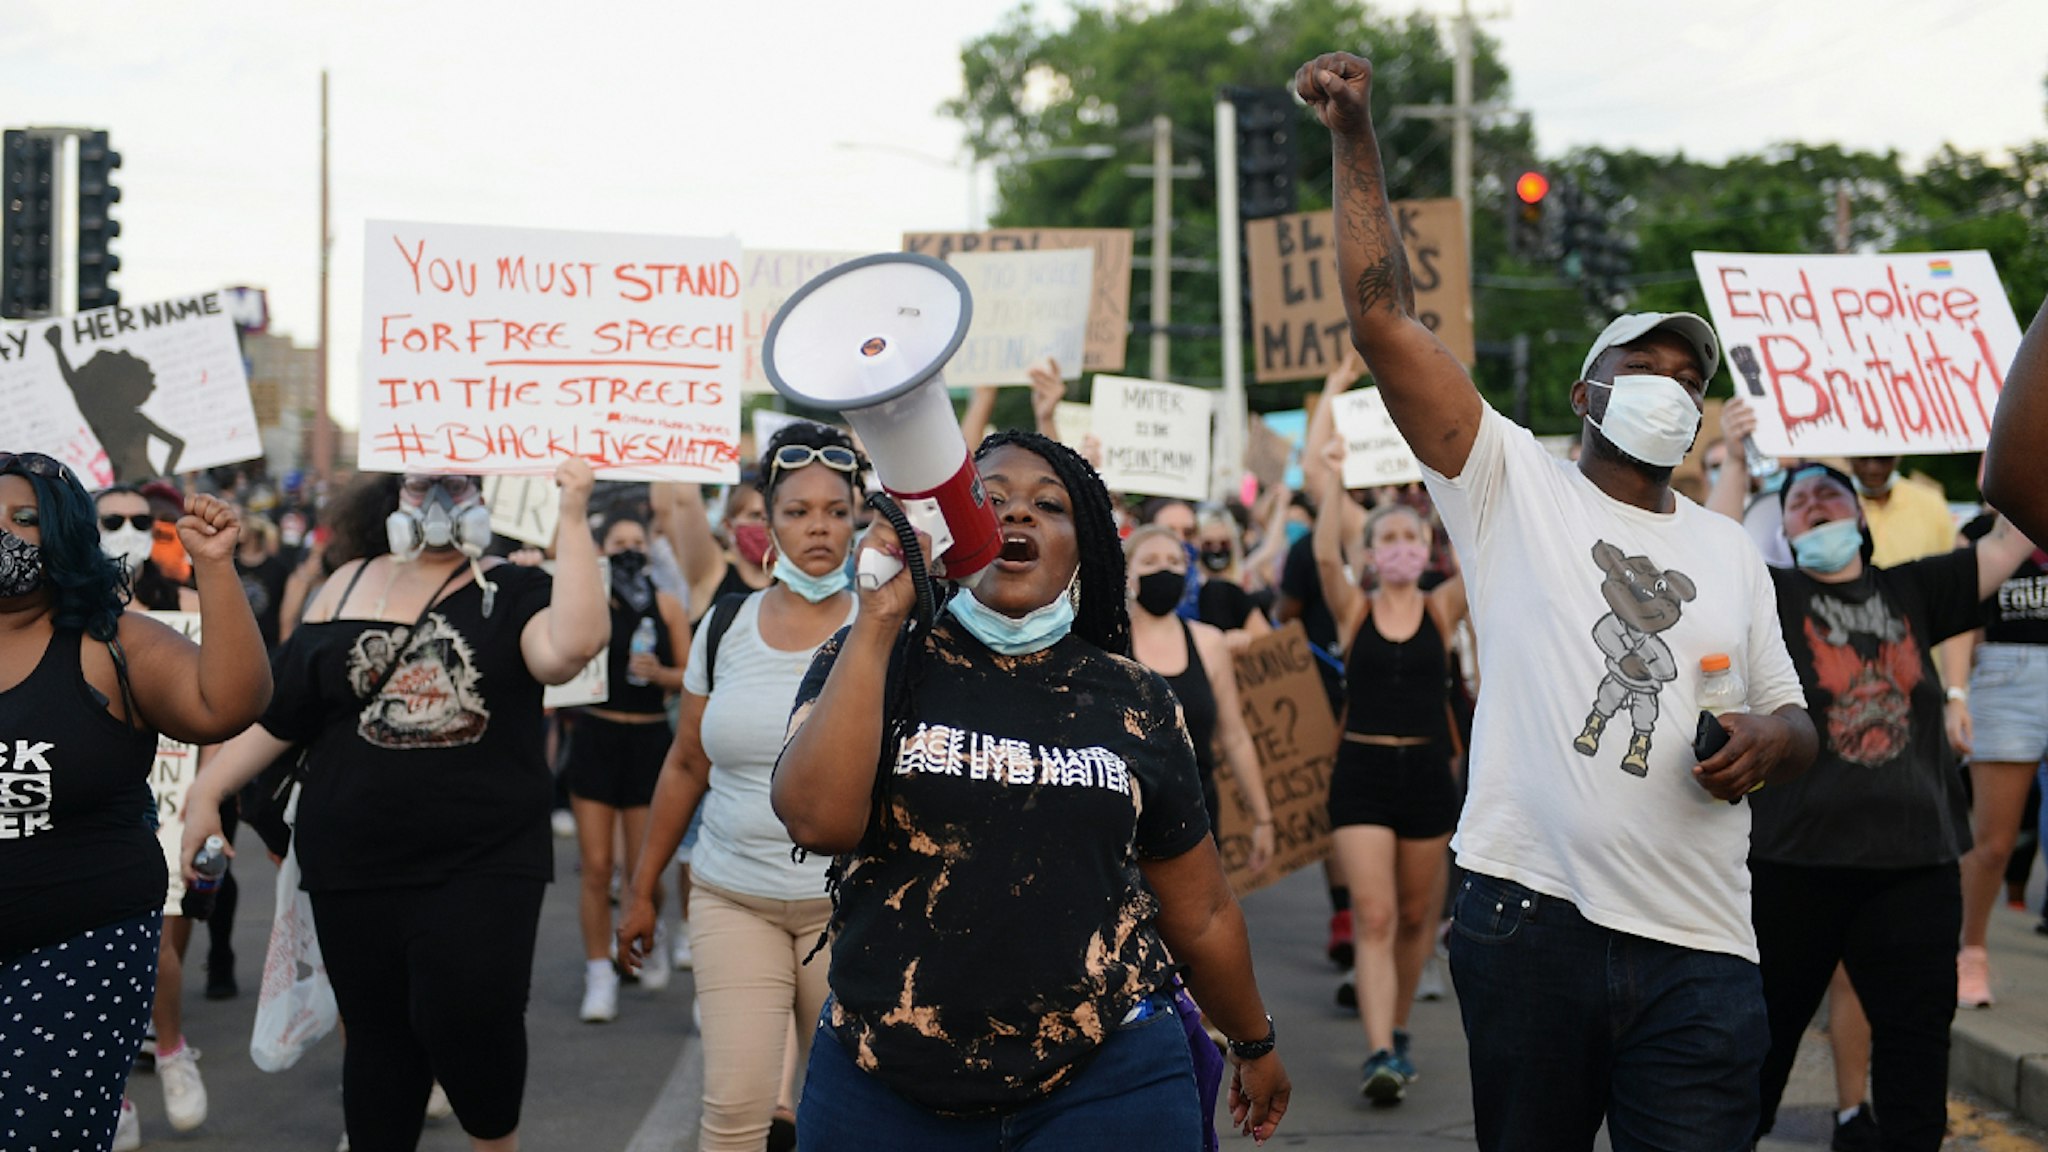 UNIVERSITY CITY, MO - JUNE 12: Missouri Democratic congressional candidate Cori Bush leads protesters as they take to the street to protest against police brutality on June 12, 2020 in University City, Missouri.